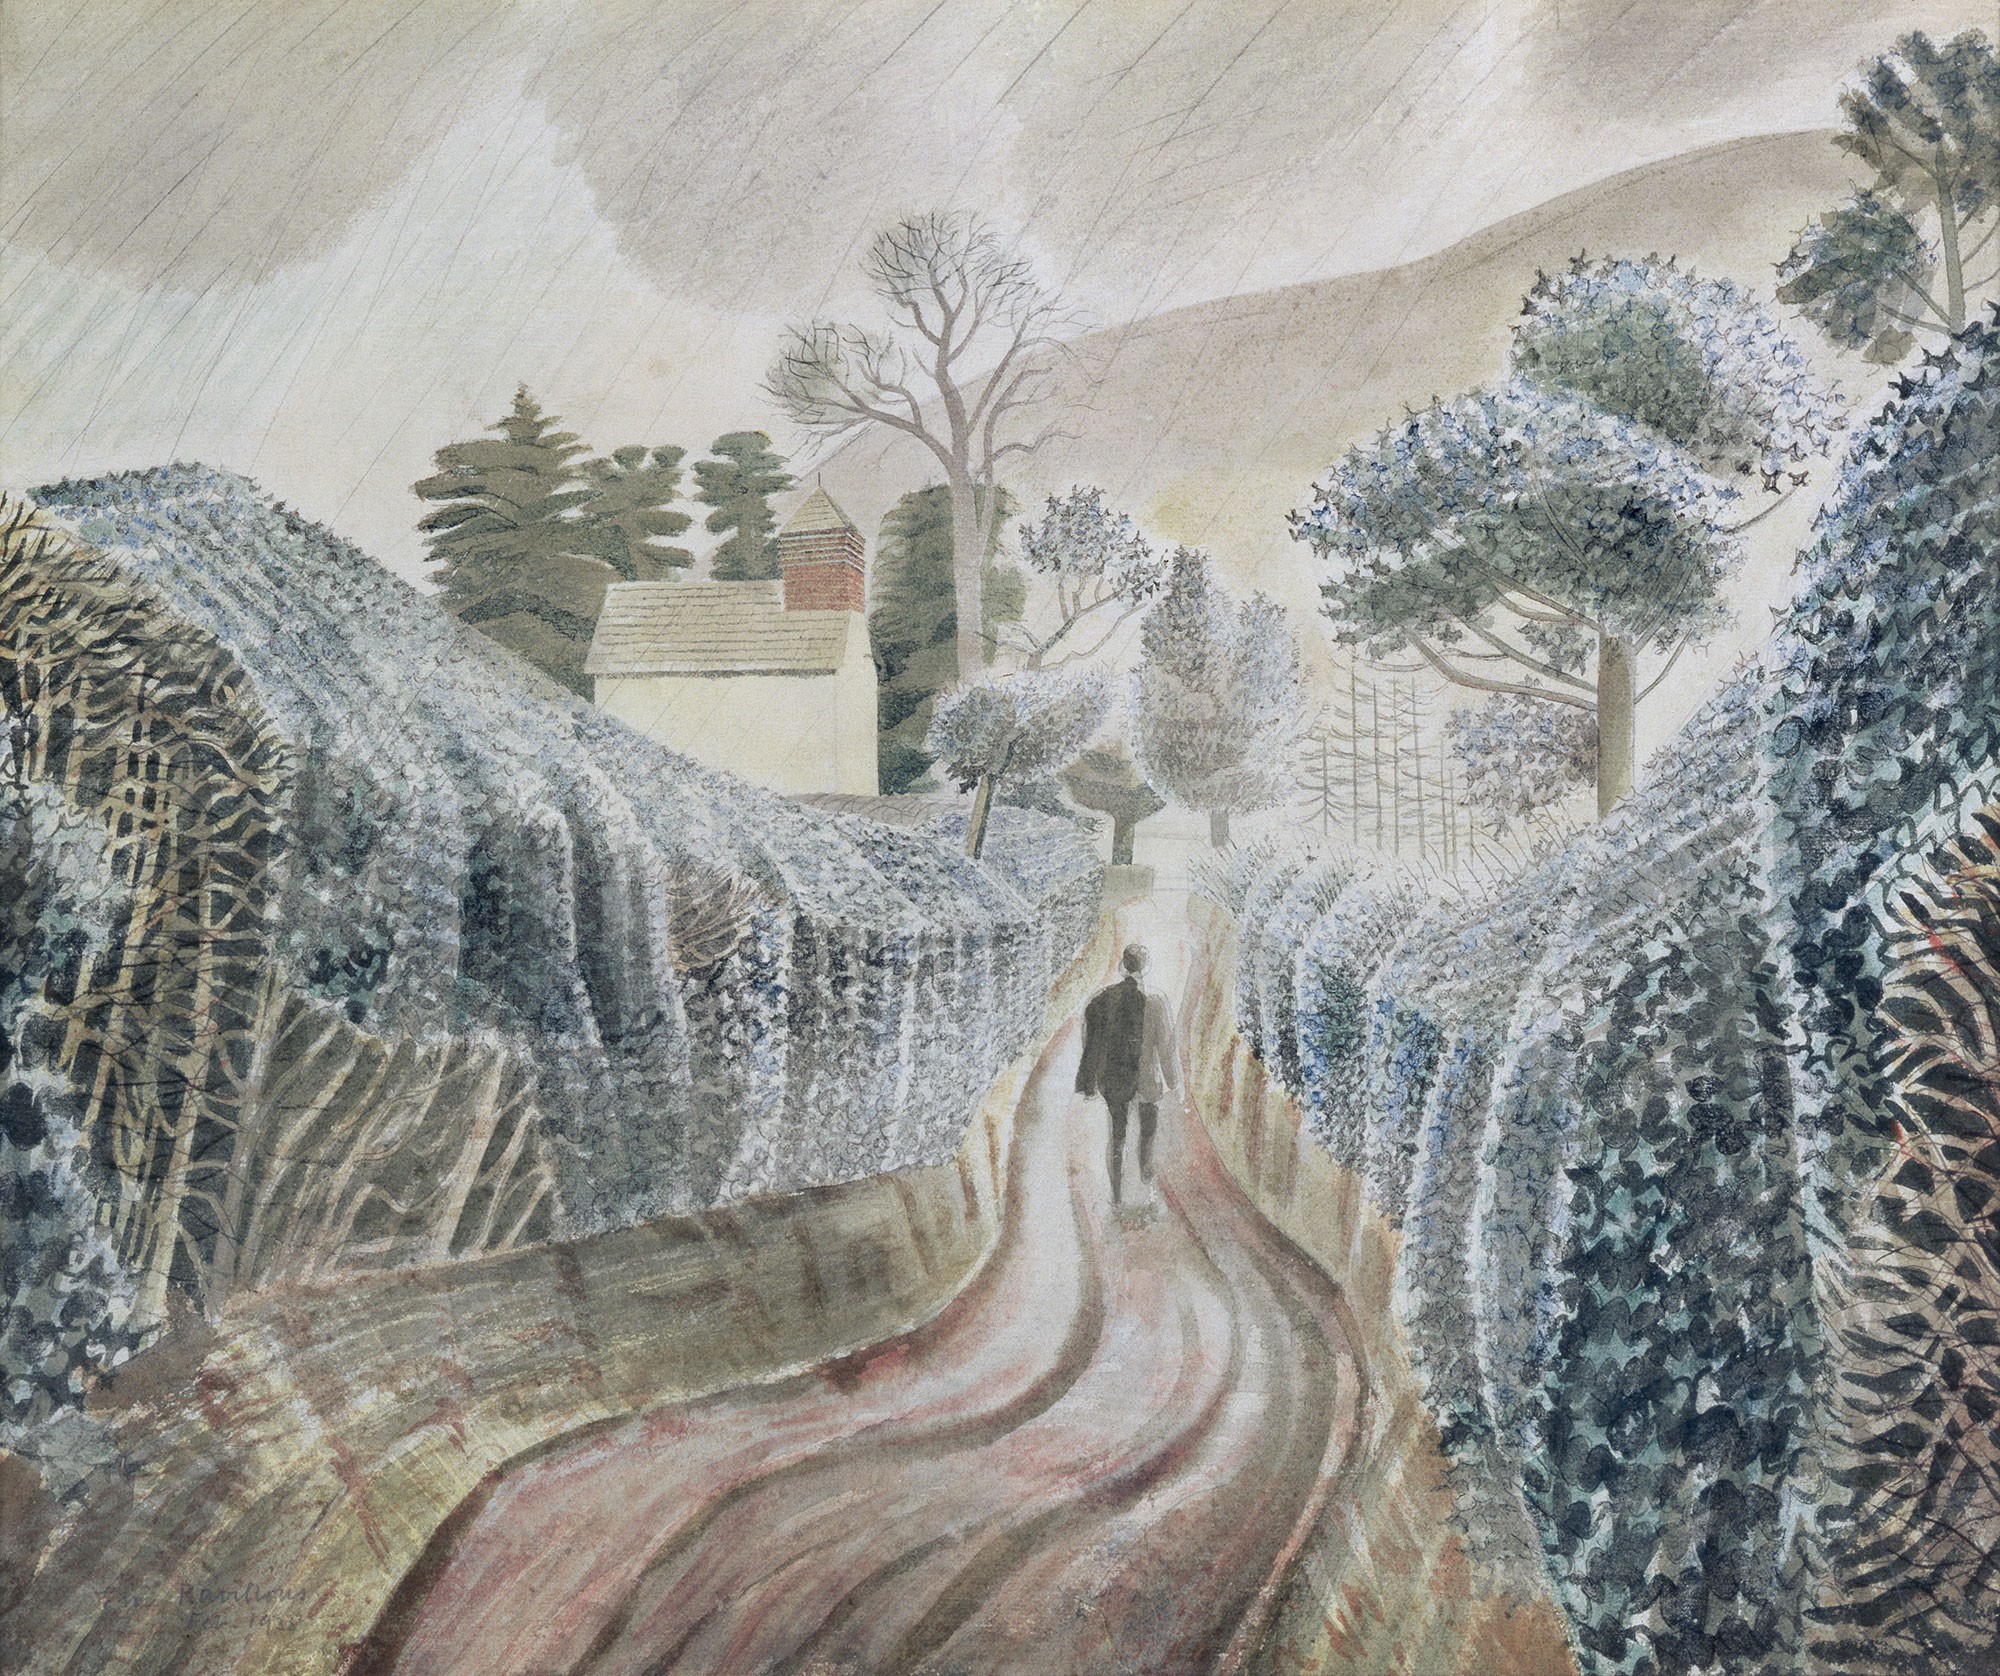 'Wet Afternoon' by Eric Ravilious